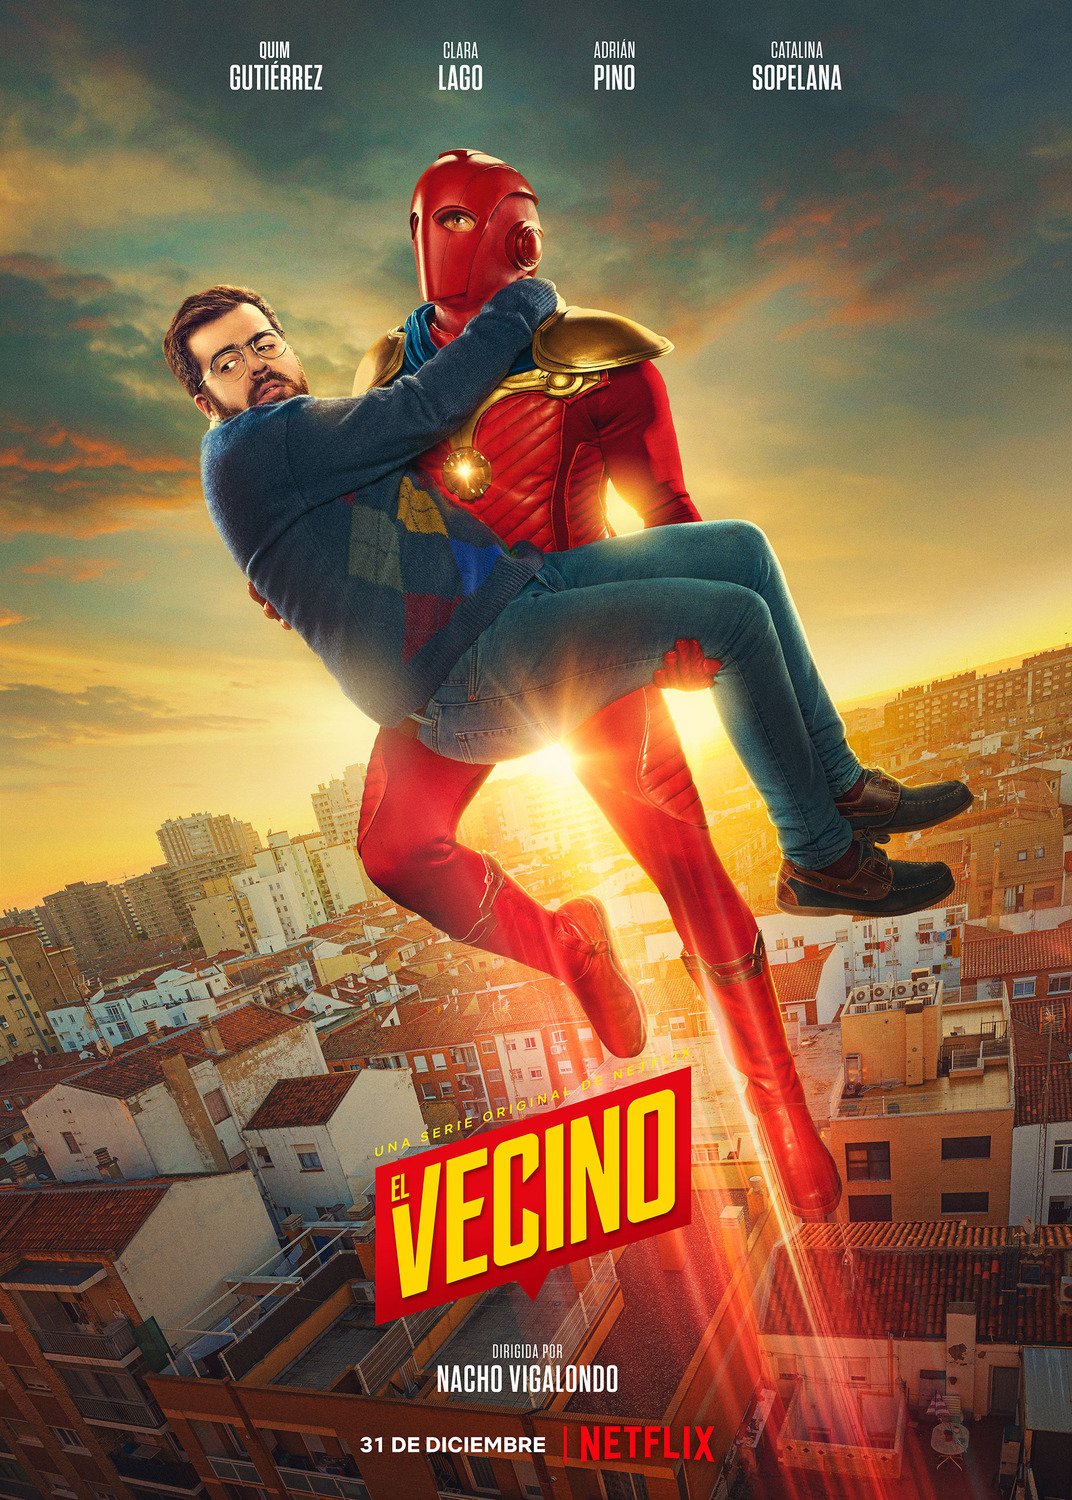 Extra Large TV Poster Image for El vecino (#5 of 9)